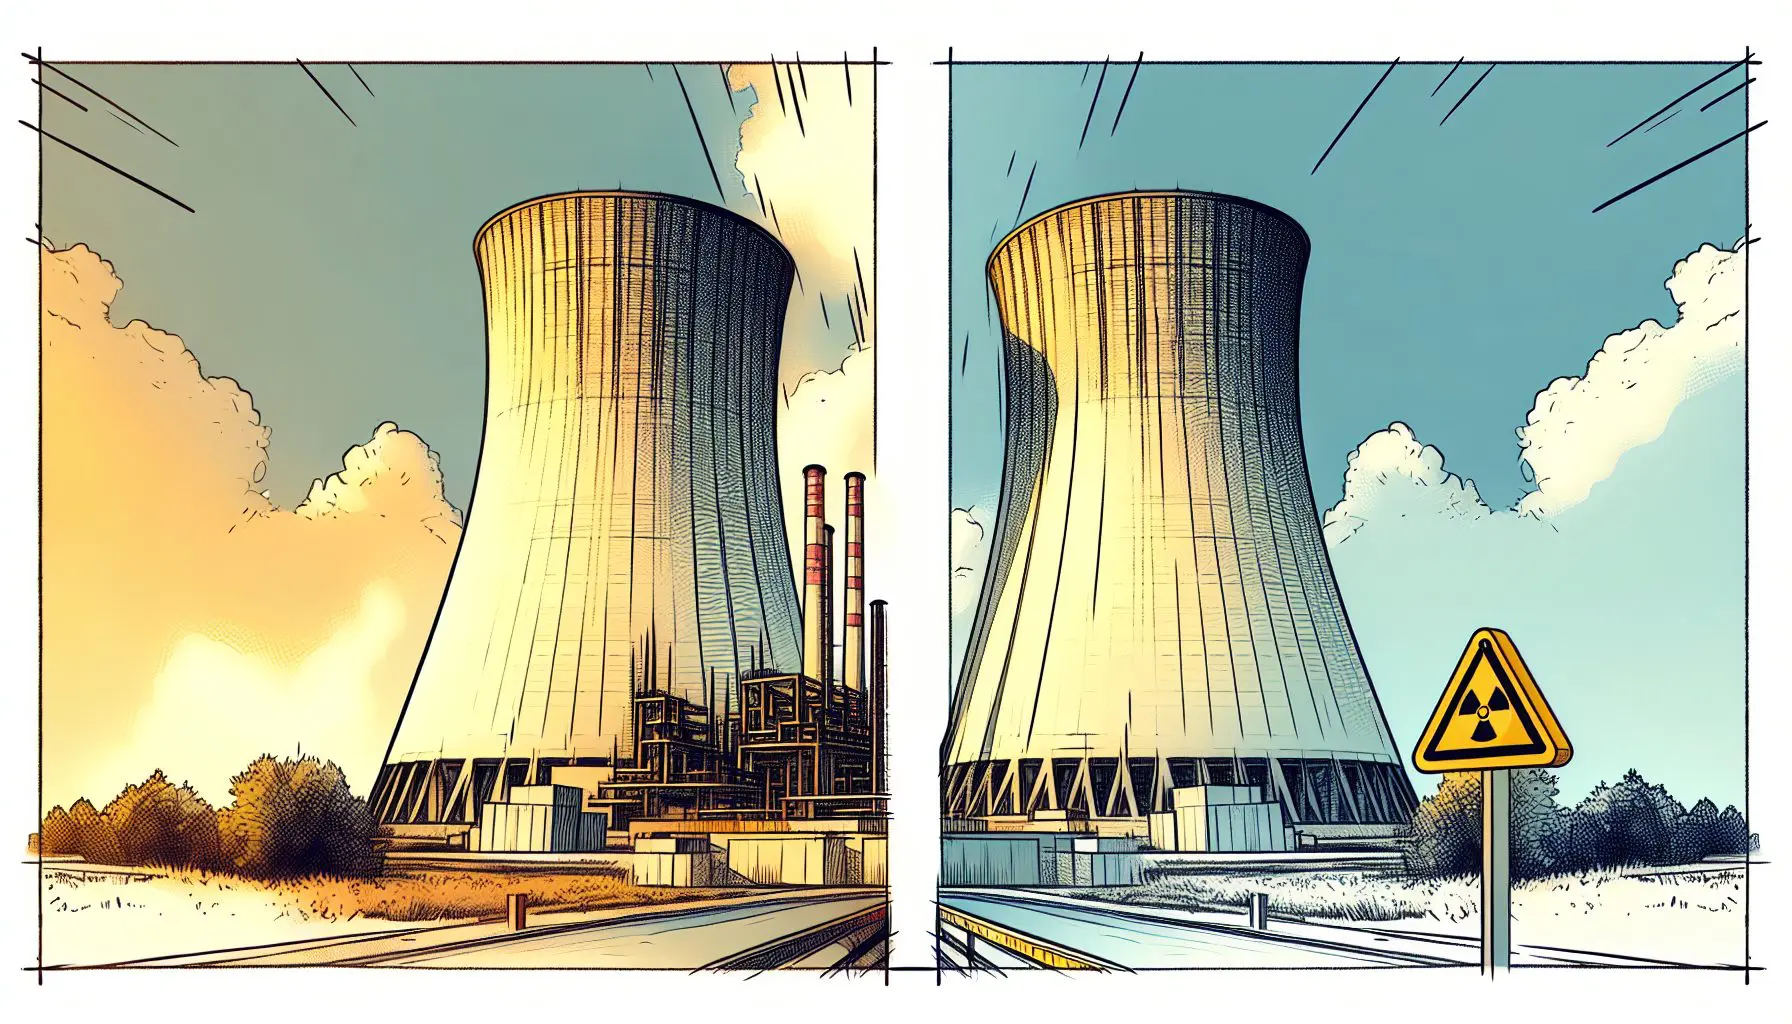 Reactor Drawings Make Nuclear History Beautiful | WIRED